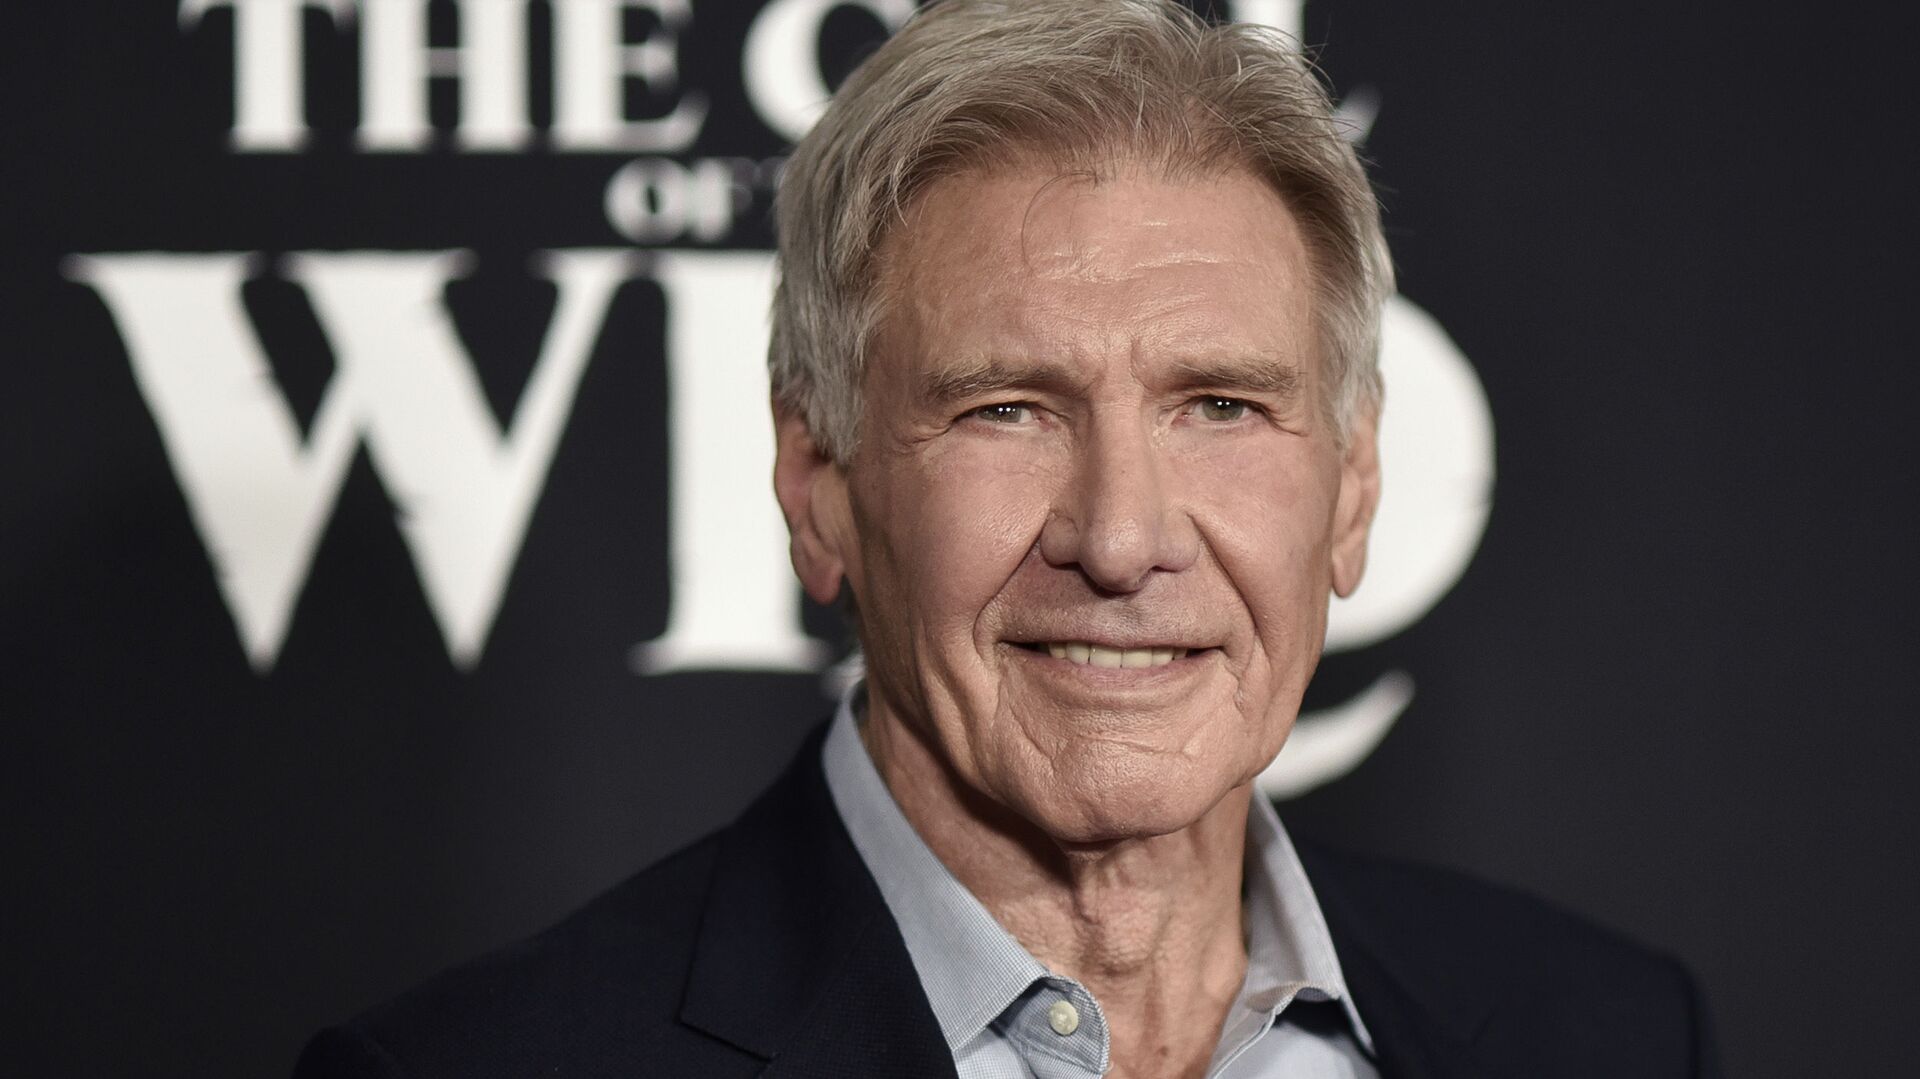 Harrison Ford attends the premiere of The Call of the Wild at El Capitan Theatre on Thursday, Feb. 13, 2020, in Los Angeles. - Sputnik International, 1920, 23.02.2022